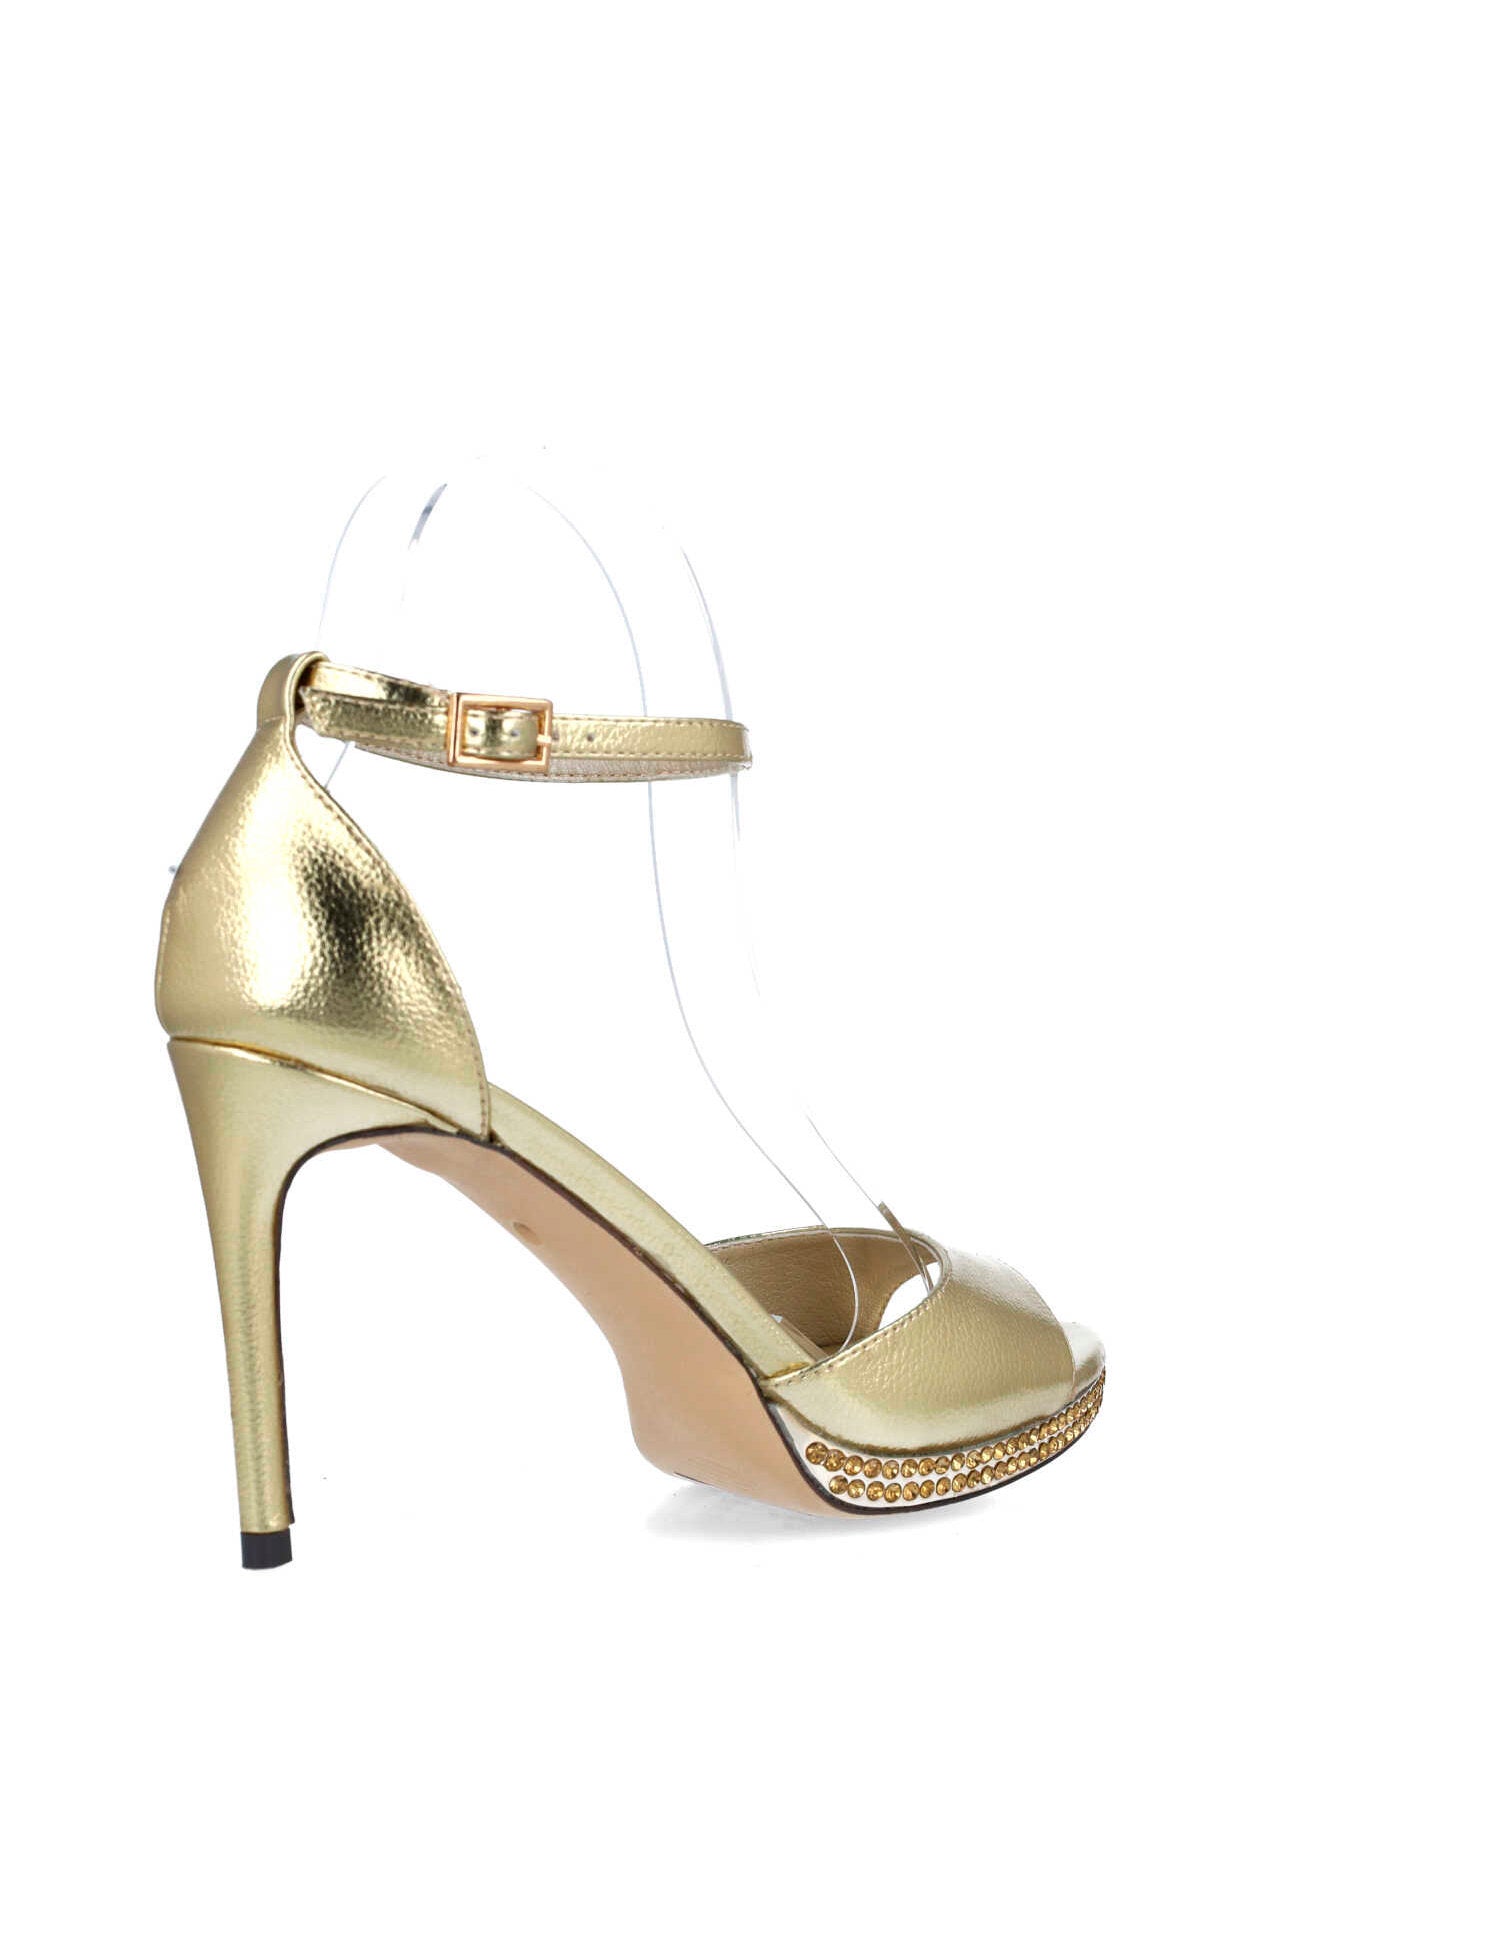 Shiny Gold High-Heel Sandals With Ankle Strap_25157_00_03